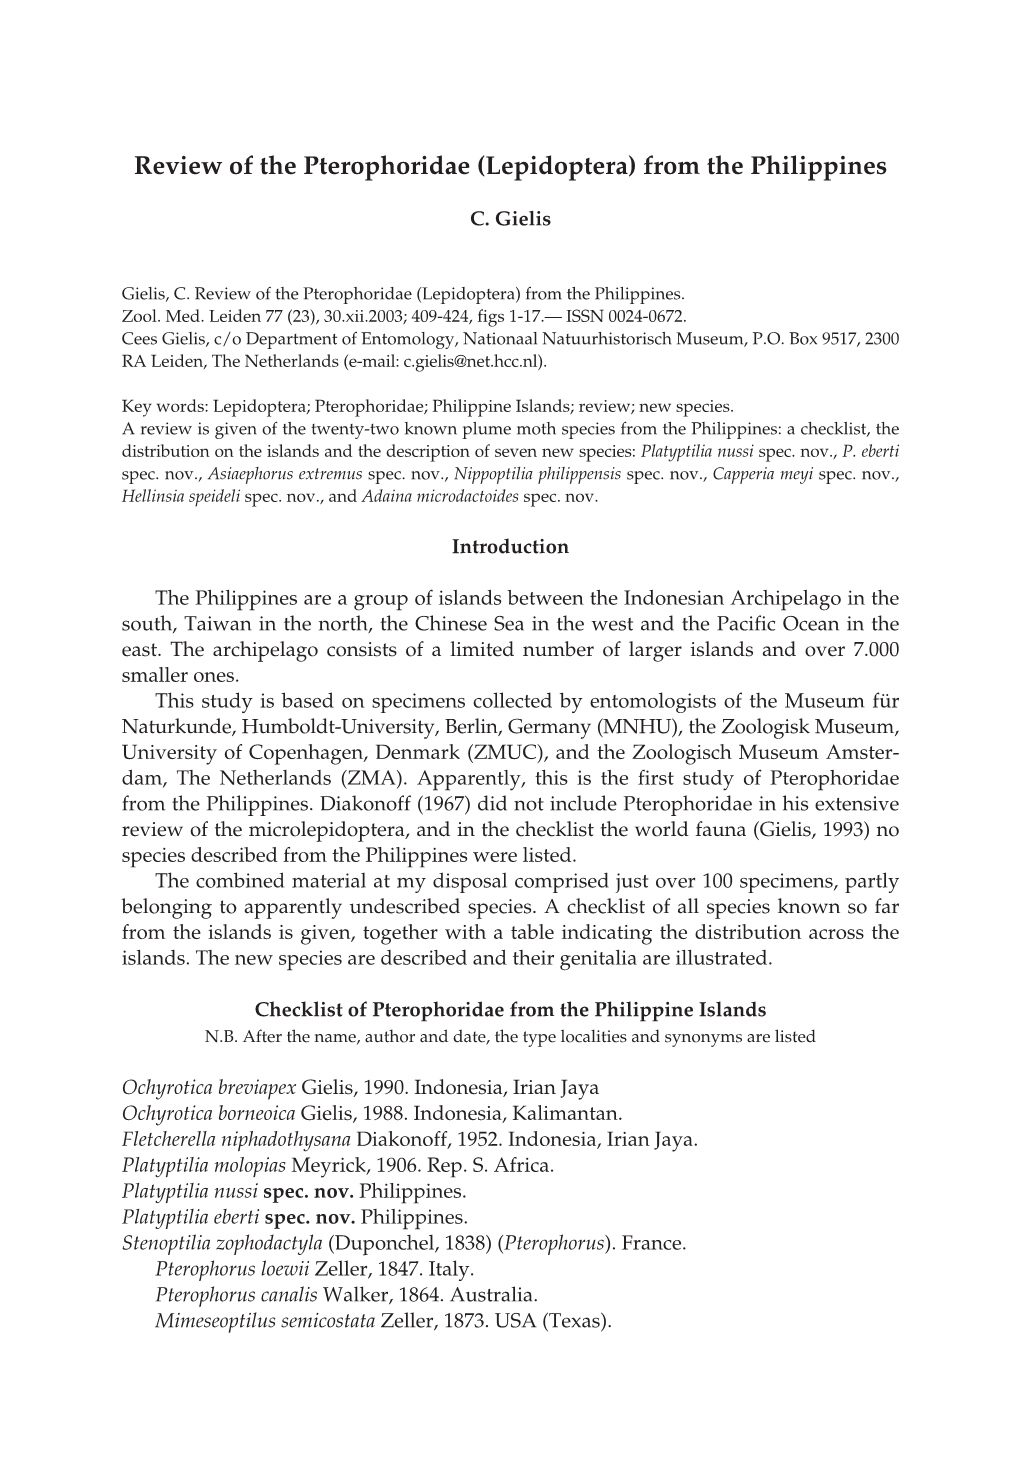 Review of the Pterophoridae (Lepidoptera) from the Philippines